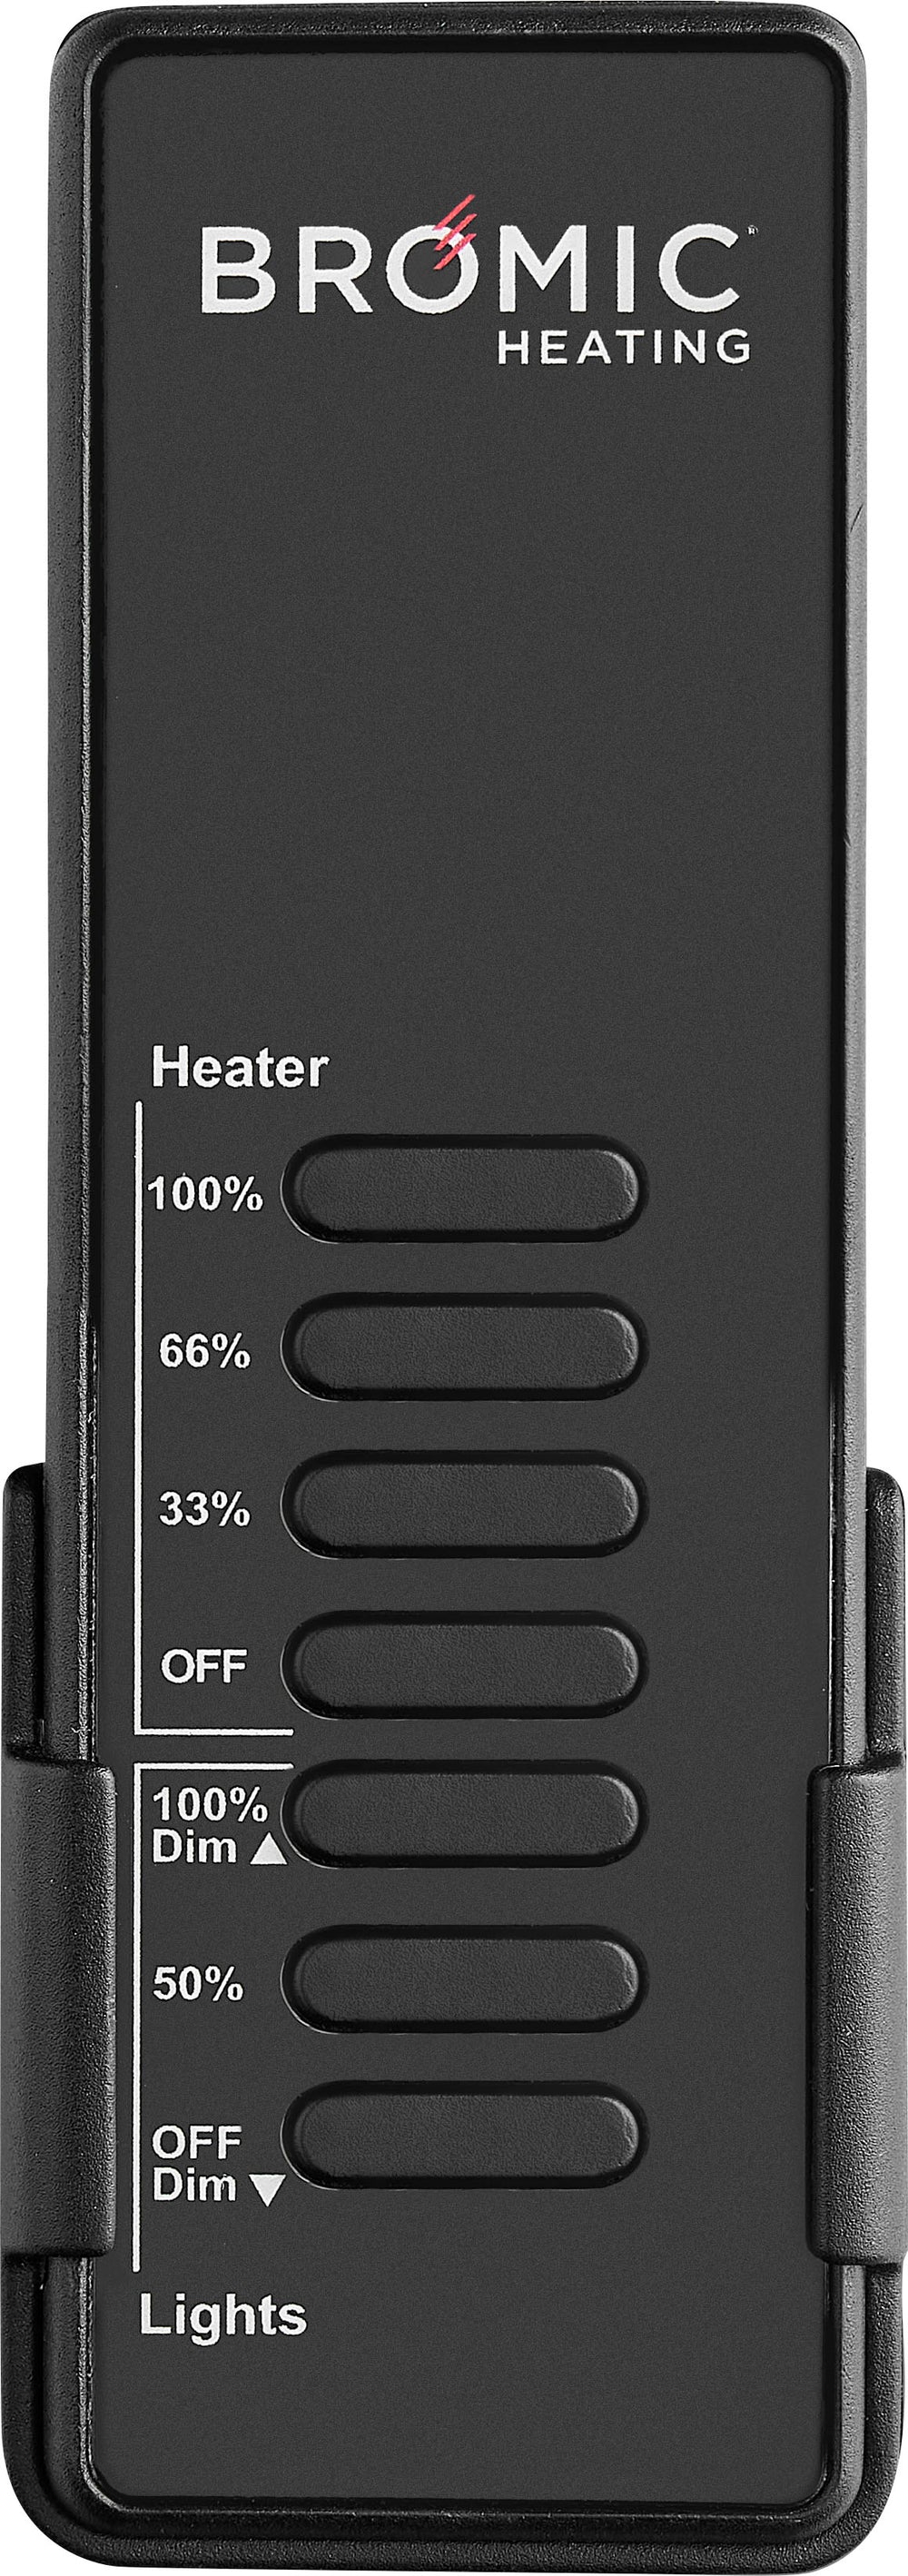 Bromic Heating - Outdoor Heater - Eclipse Portable & Dimmer Controller - 2900W - 220-240V - Black_1